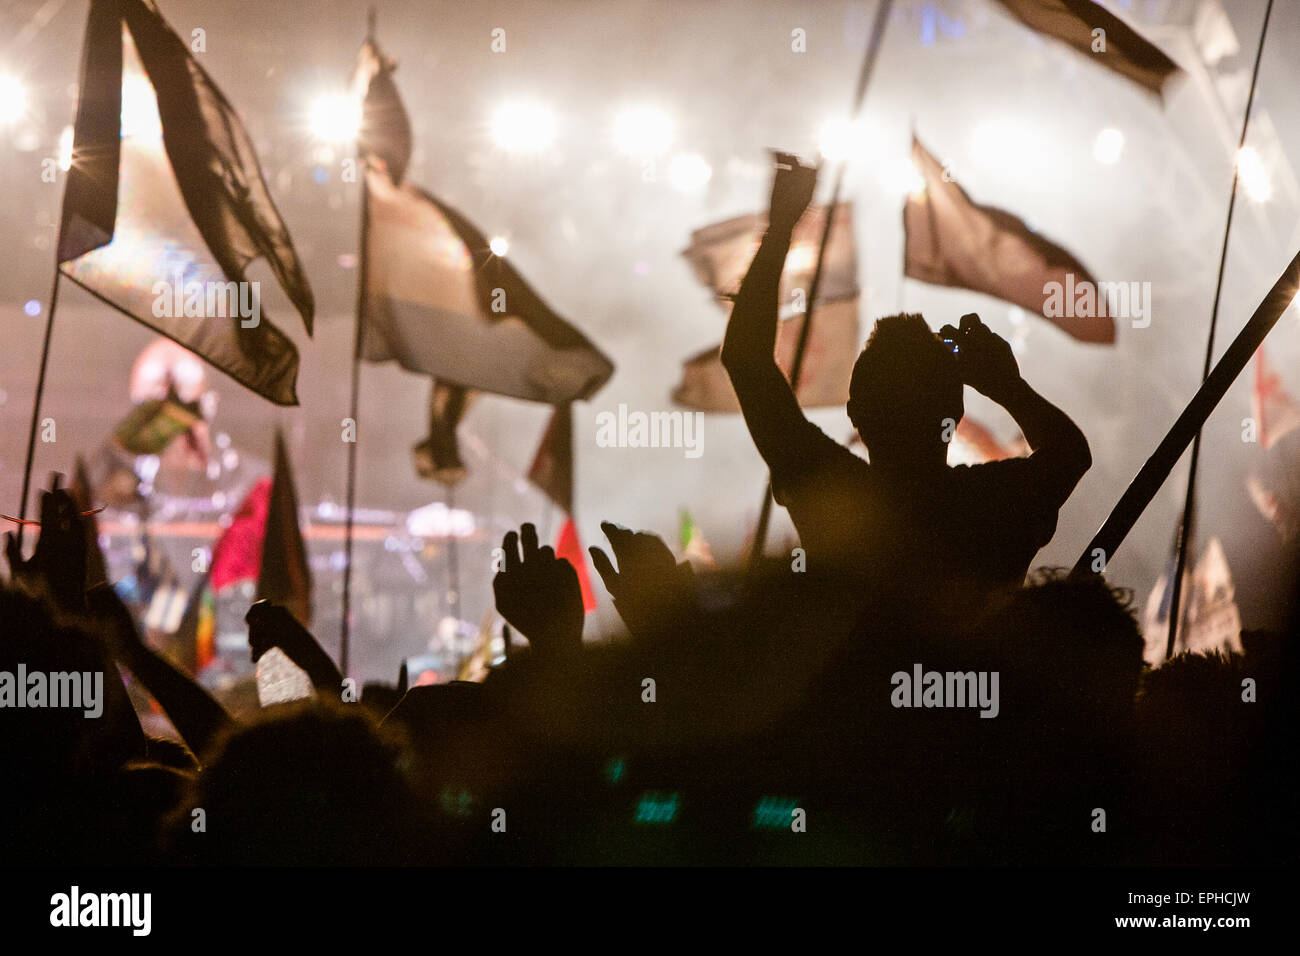 Flags and crowd at Pyramid Stage during headlining performance at Glastonbury Festival/ "Glasto" held on working farm, Worthy Fa Stock Photo